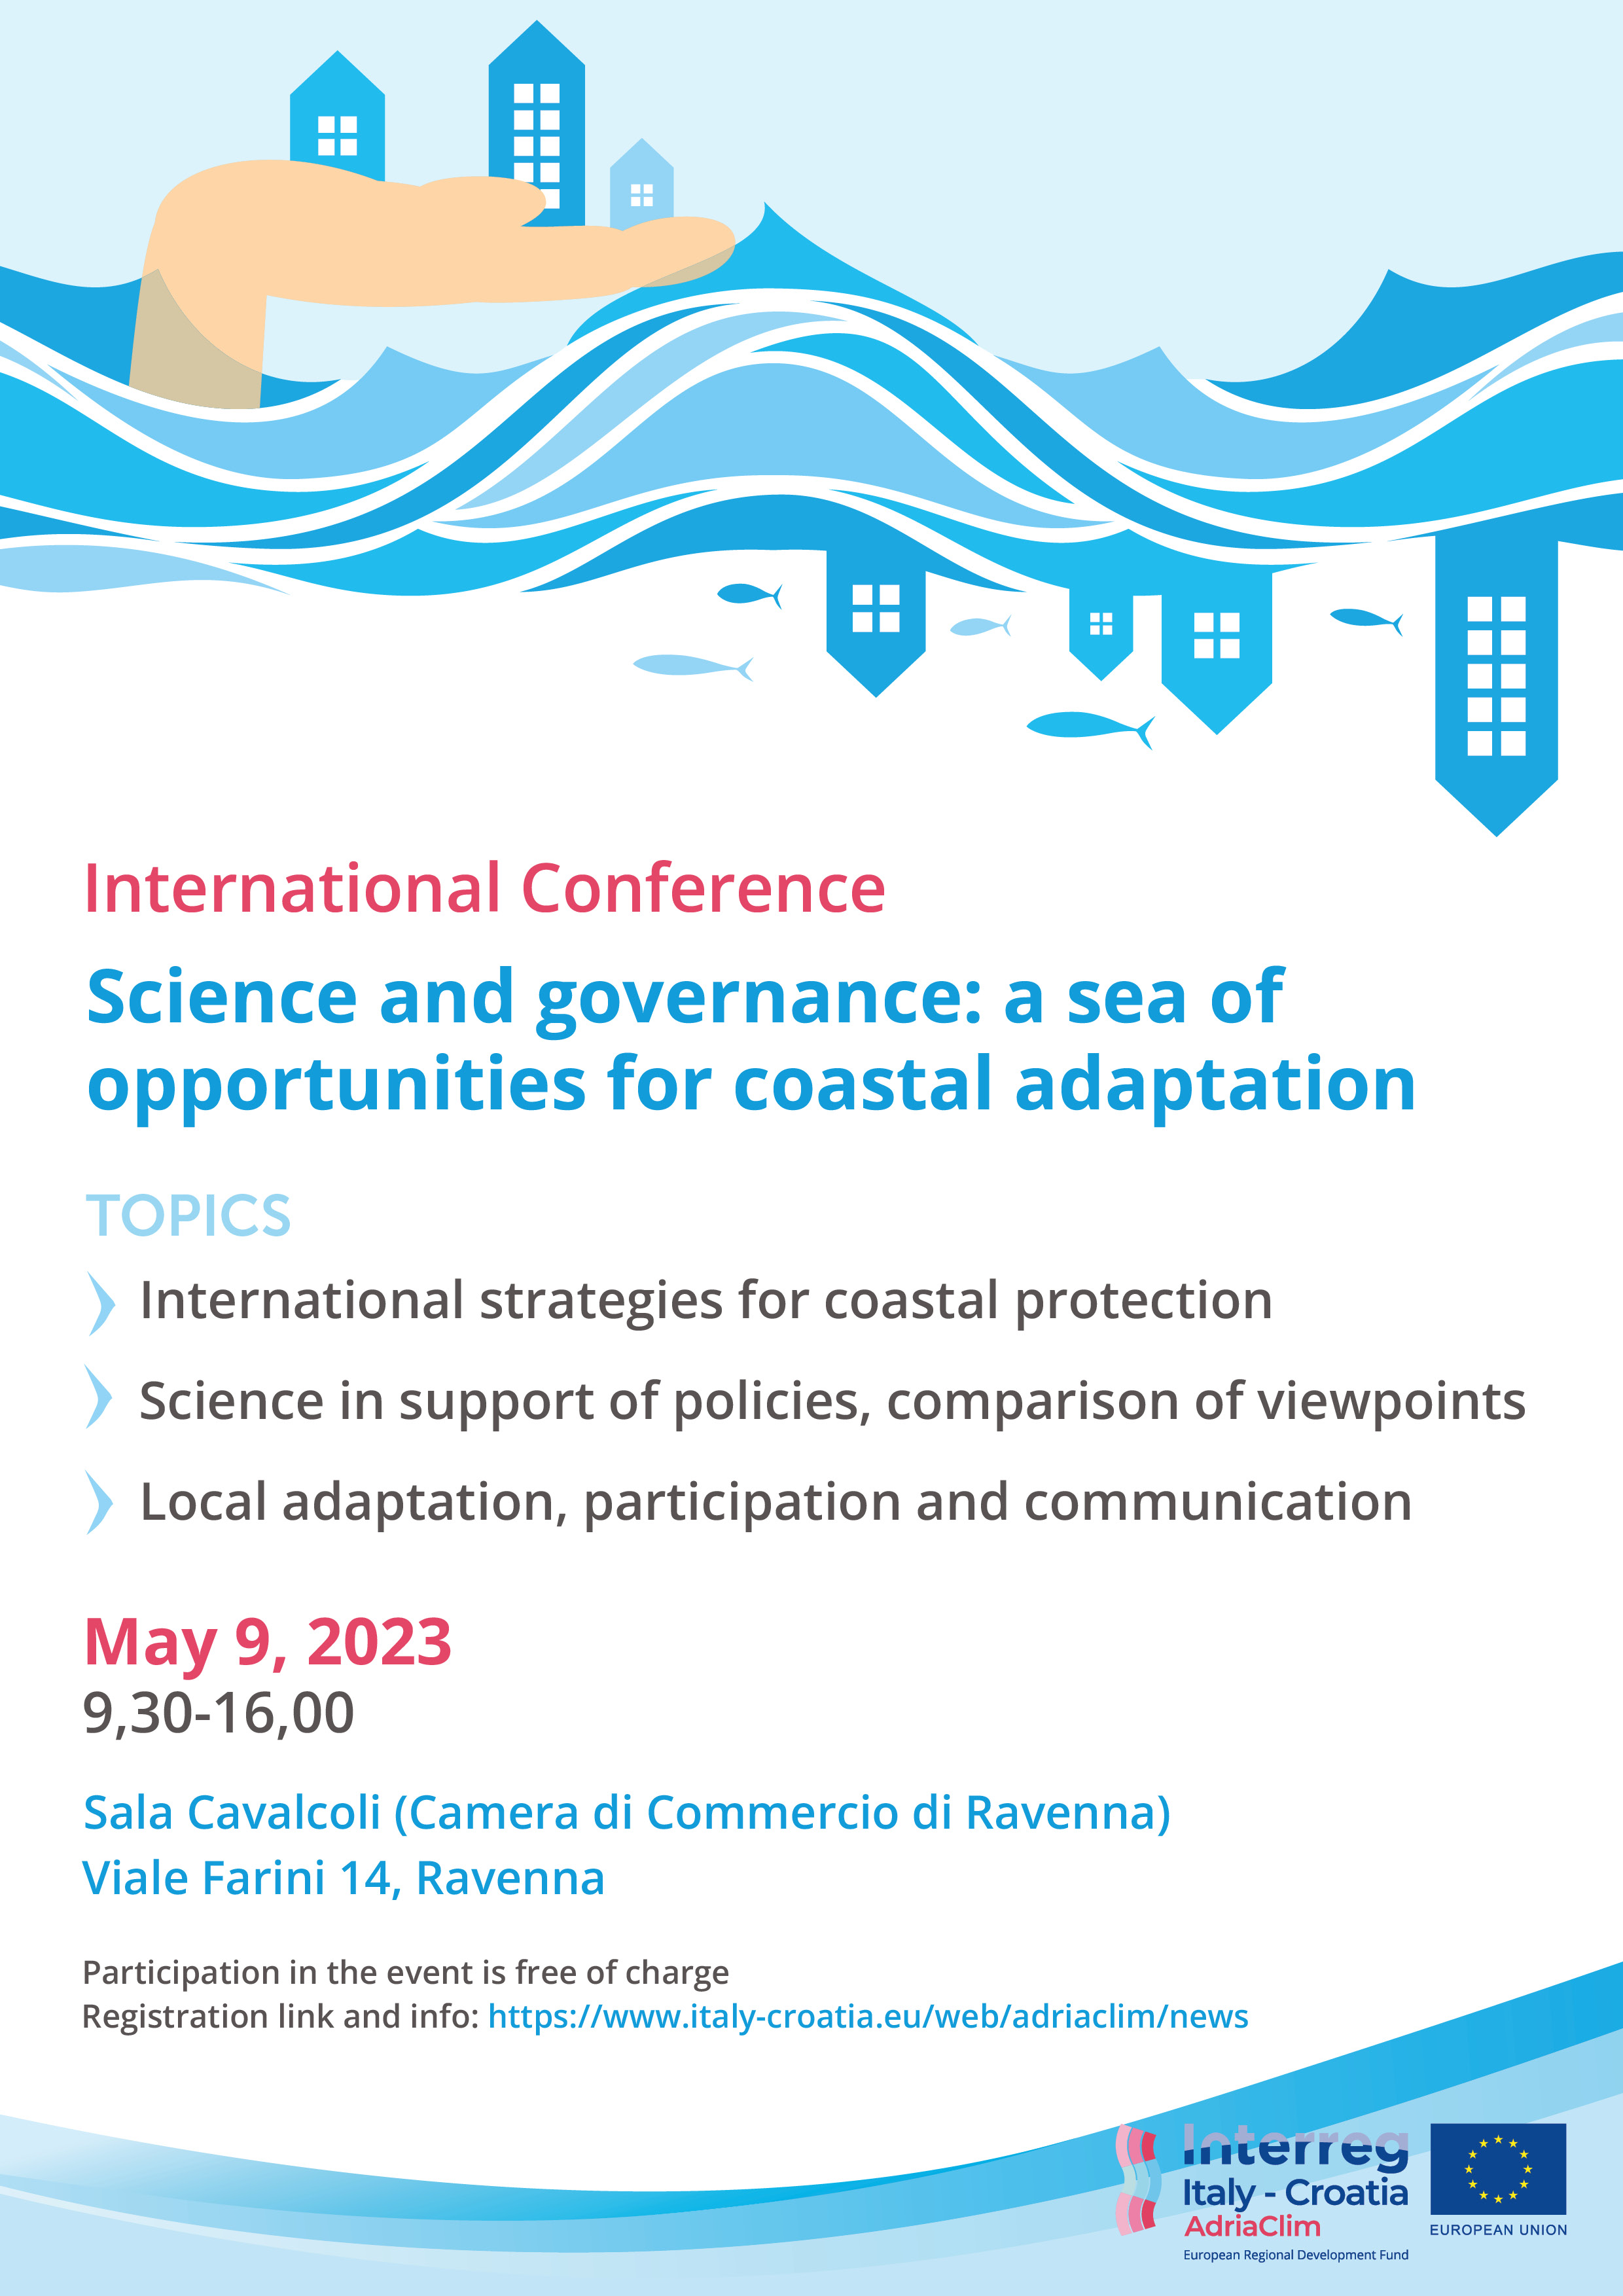 AdriaClim Final Conference “Science and governance: a sea of opportunities for coastal adaptation”